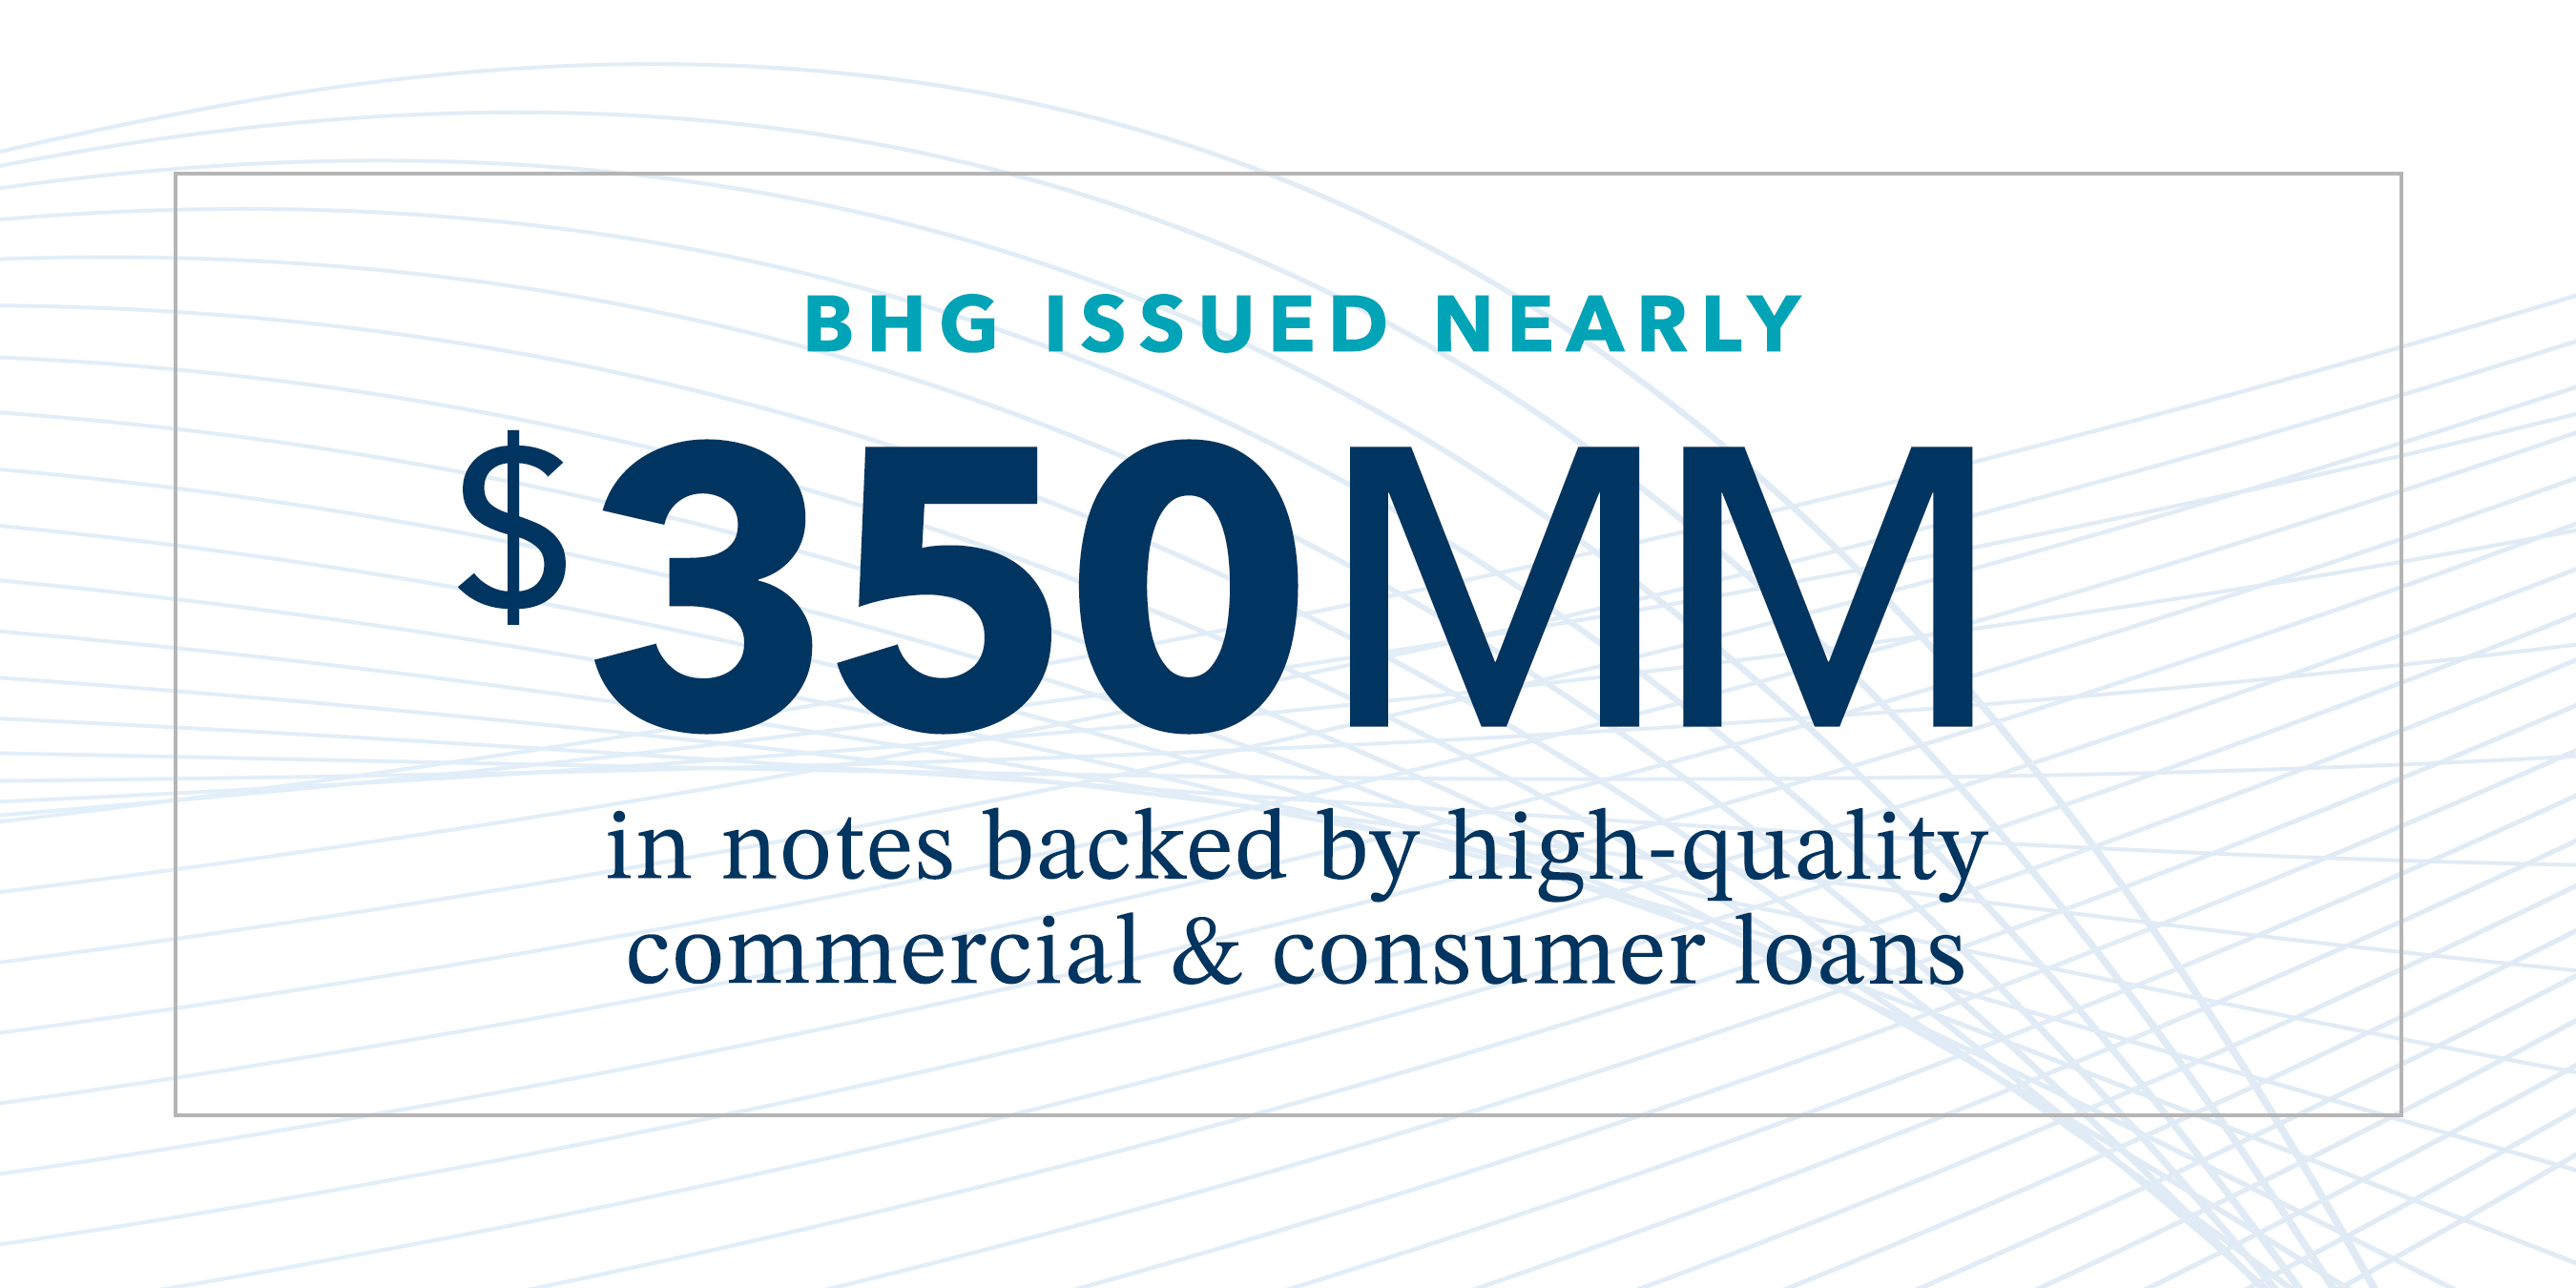 Bankers Healthcare Group issued nearly $350 million in notes backed by high-quality commercial and consumer loans.